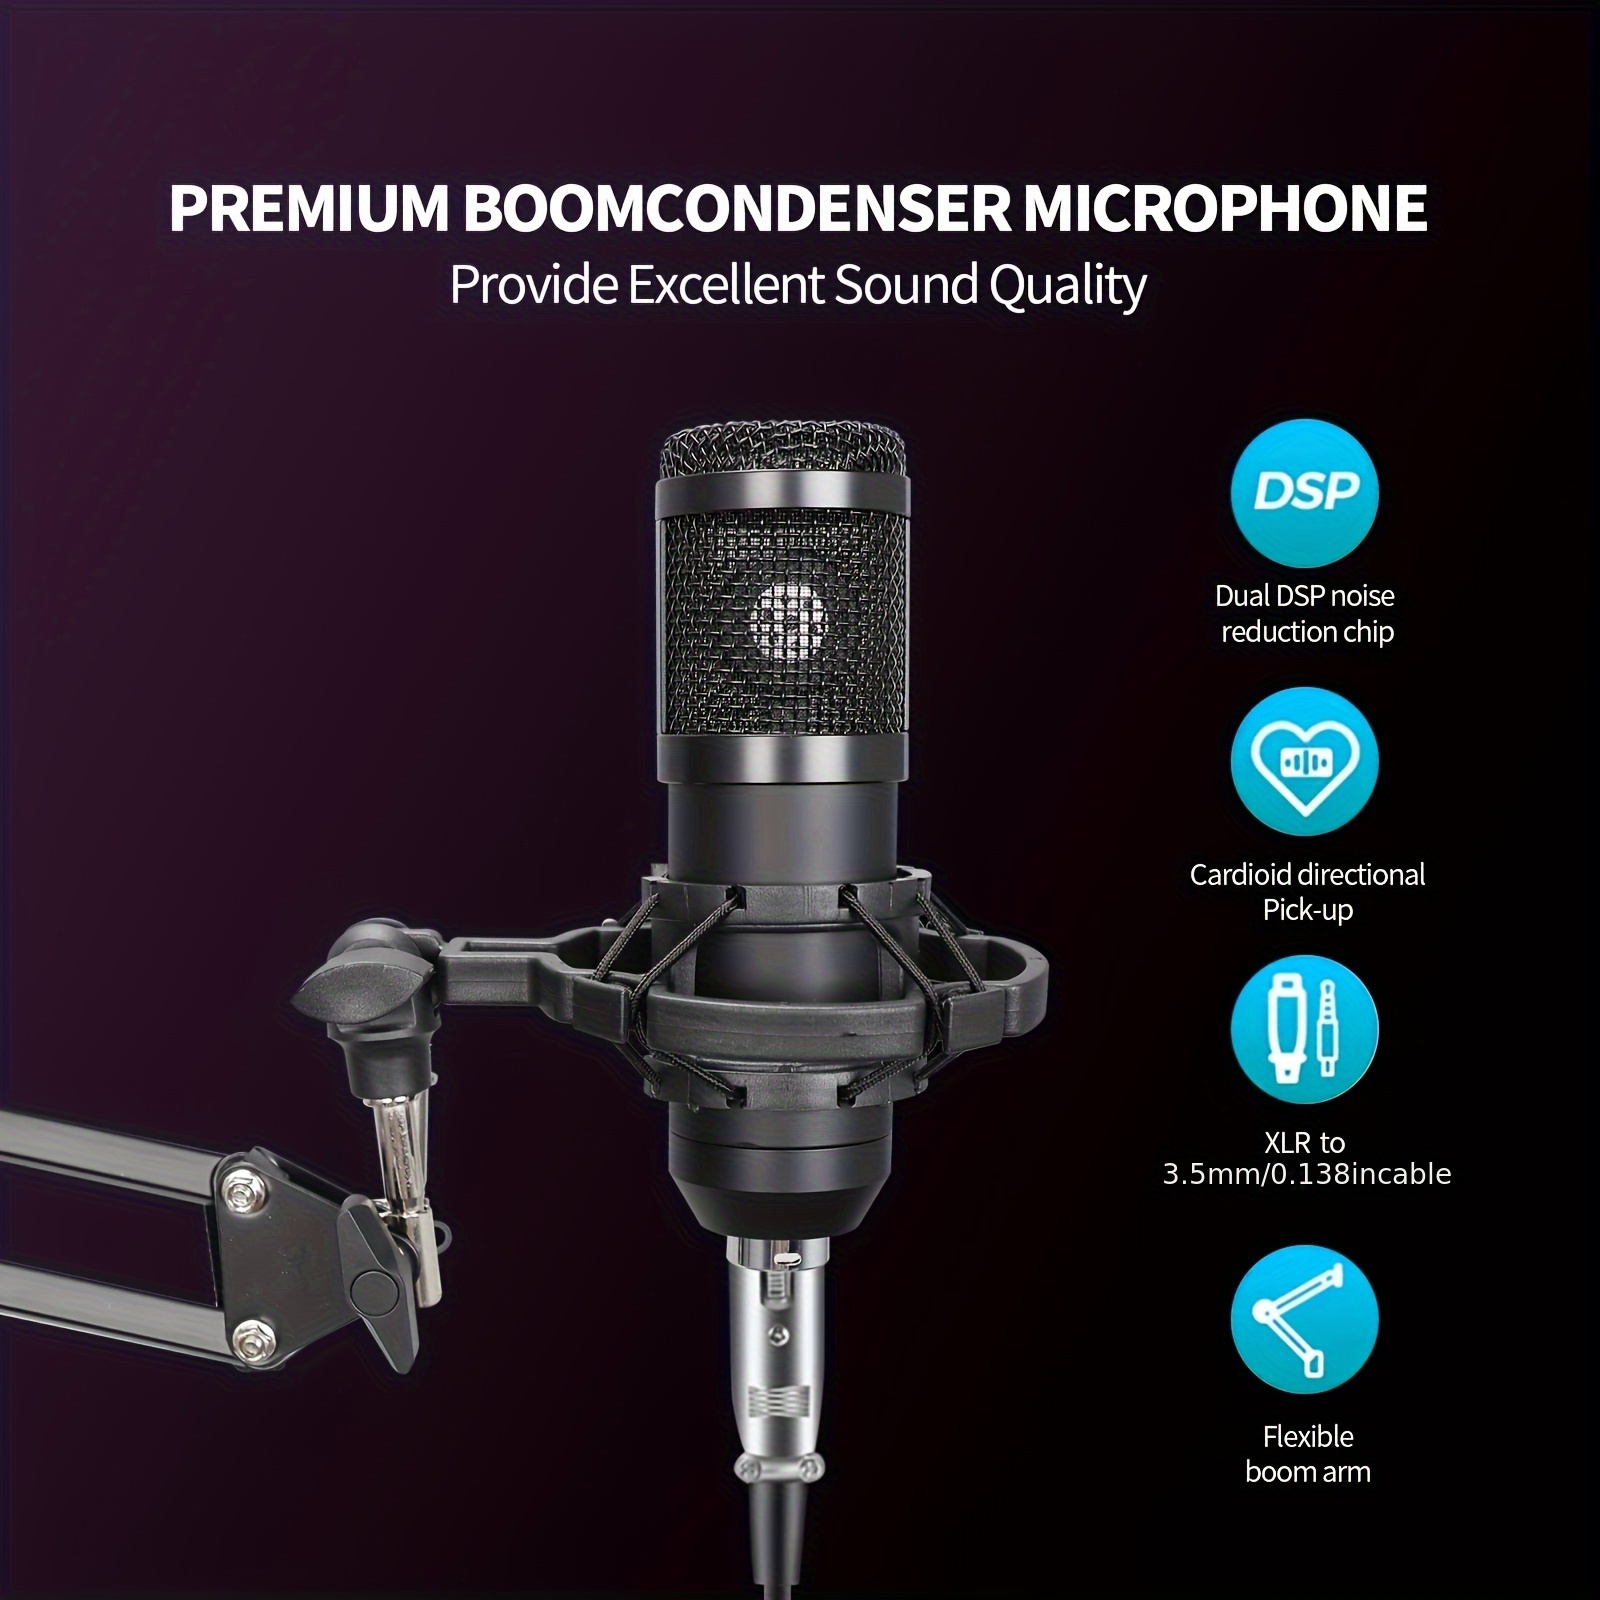 Podcast Equipment Bundle for 2 - Audio Interface-All-In-One Dj Equipment  with Condenser Microphone for Podcast Recording Gaming